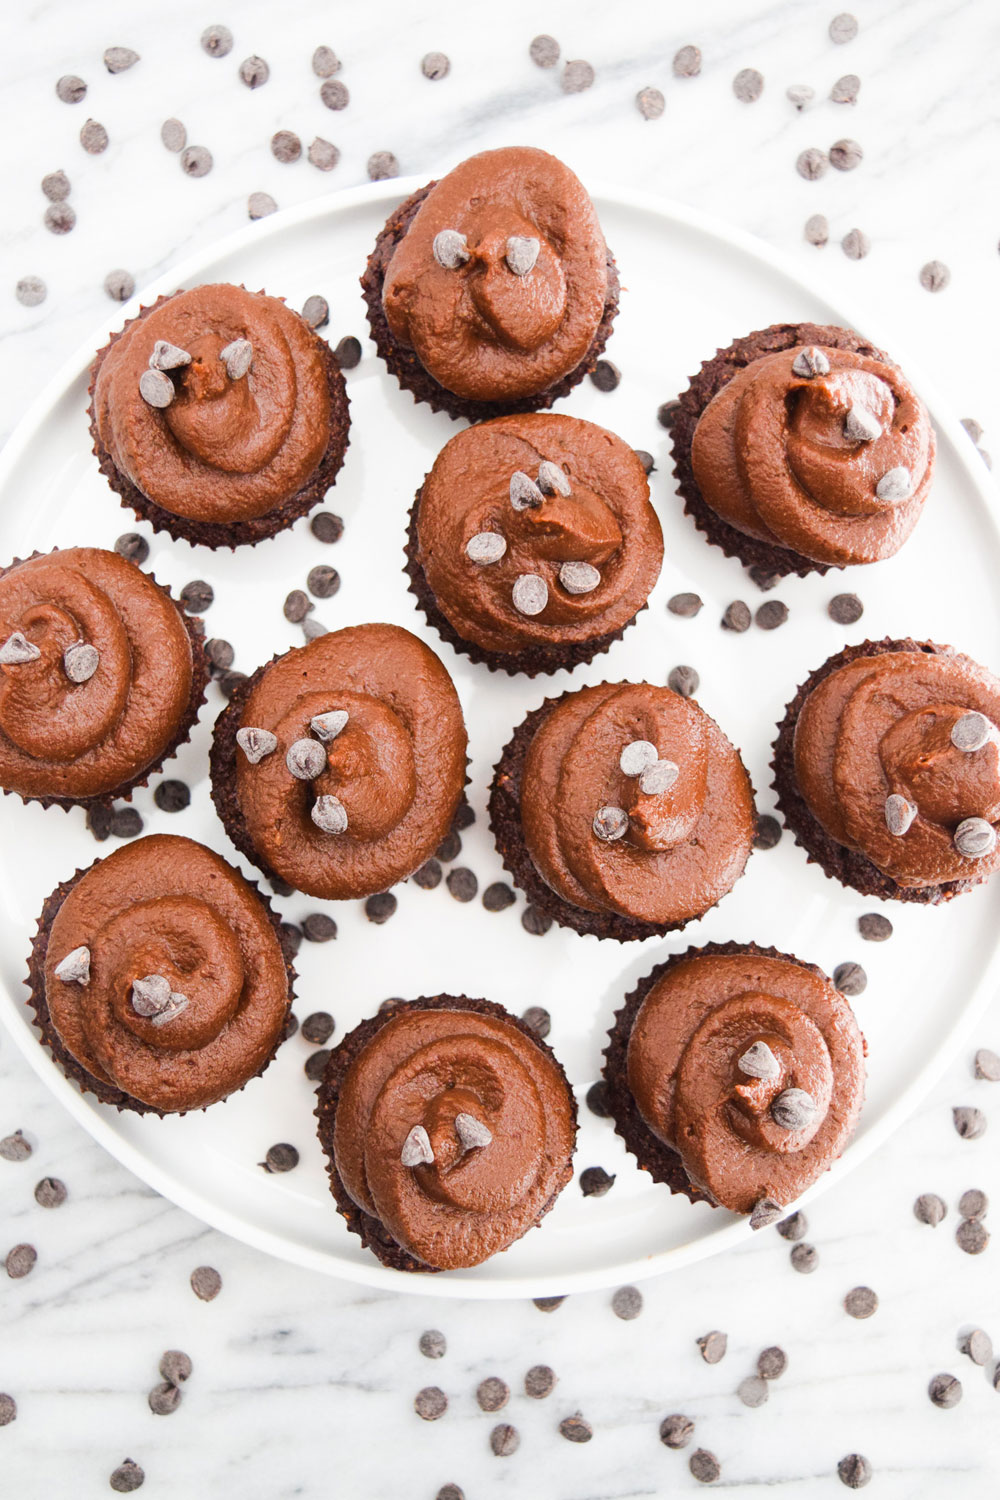 Vegan Chocolate Cupcakes with Chocolate Frosting